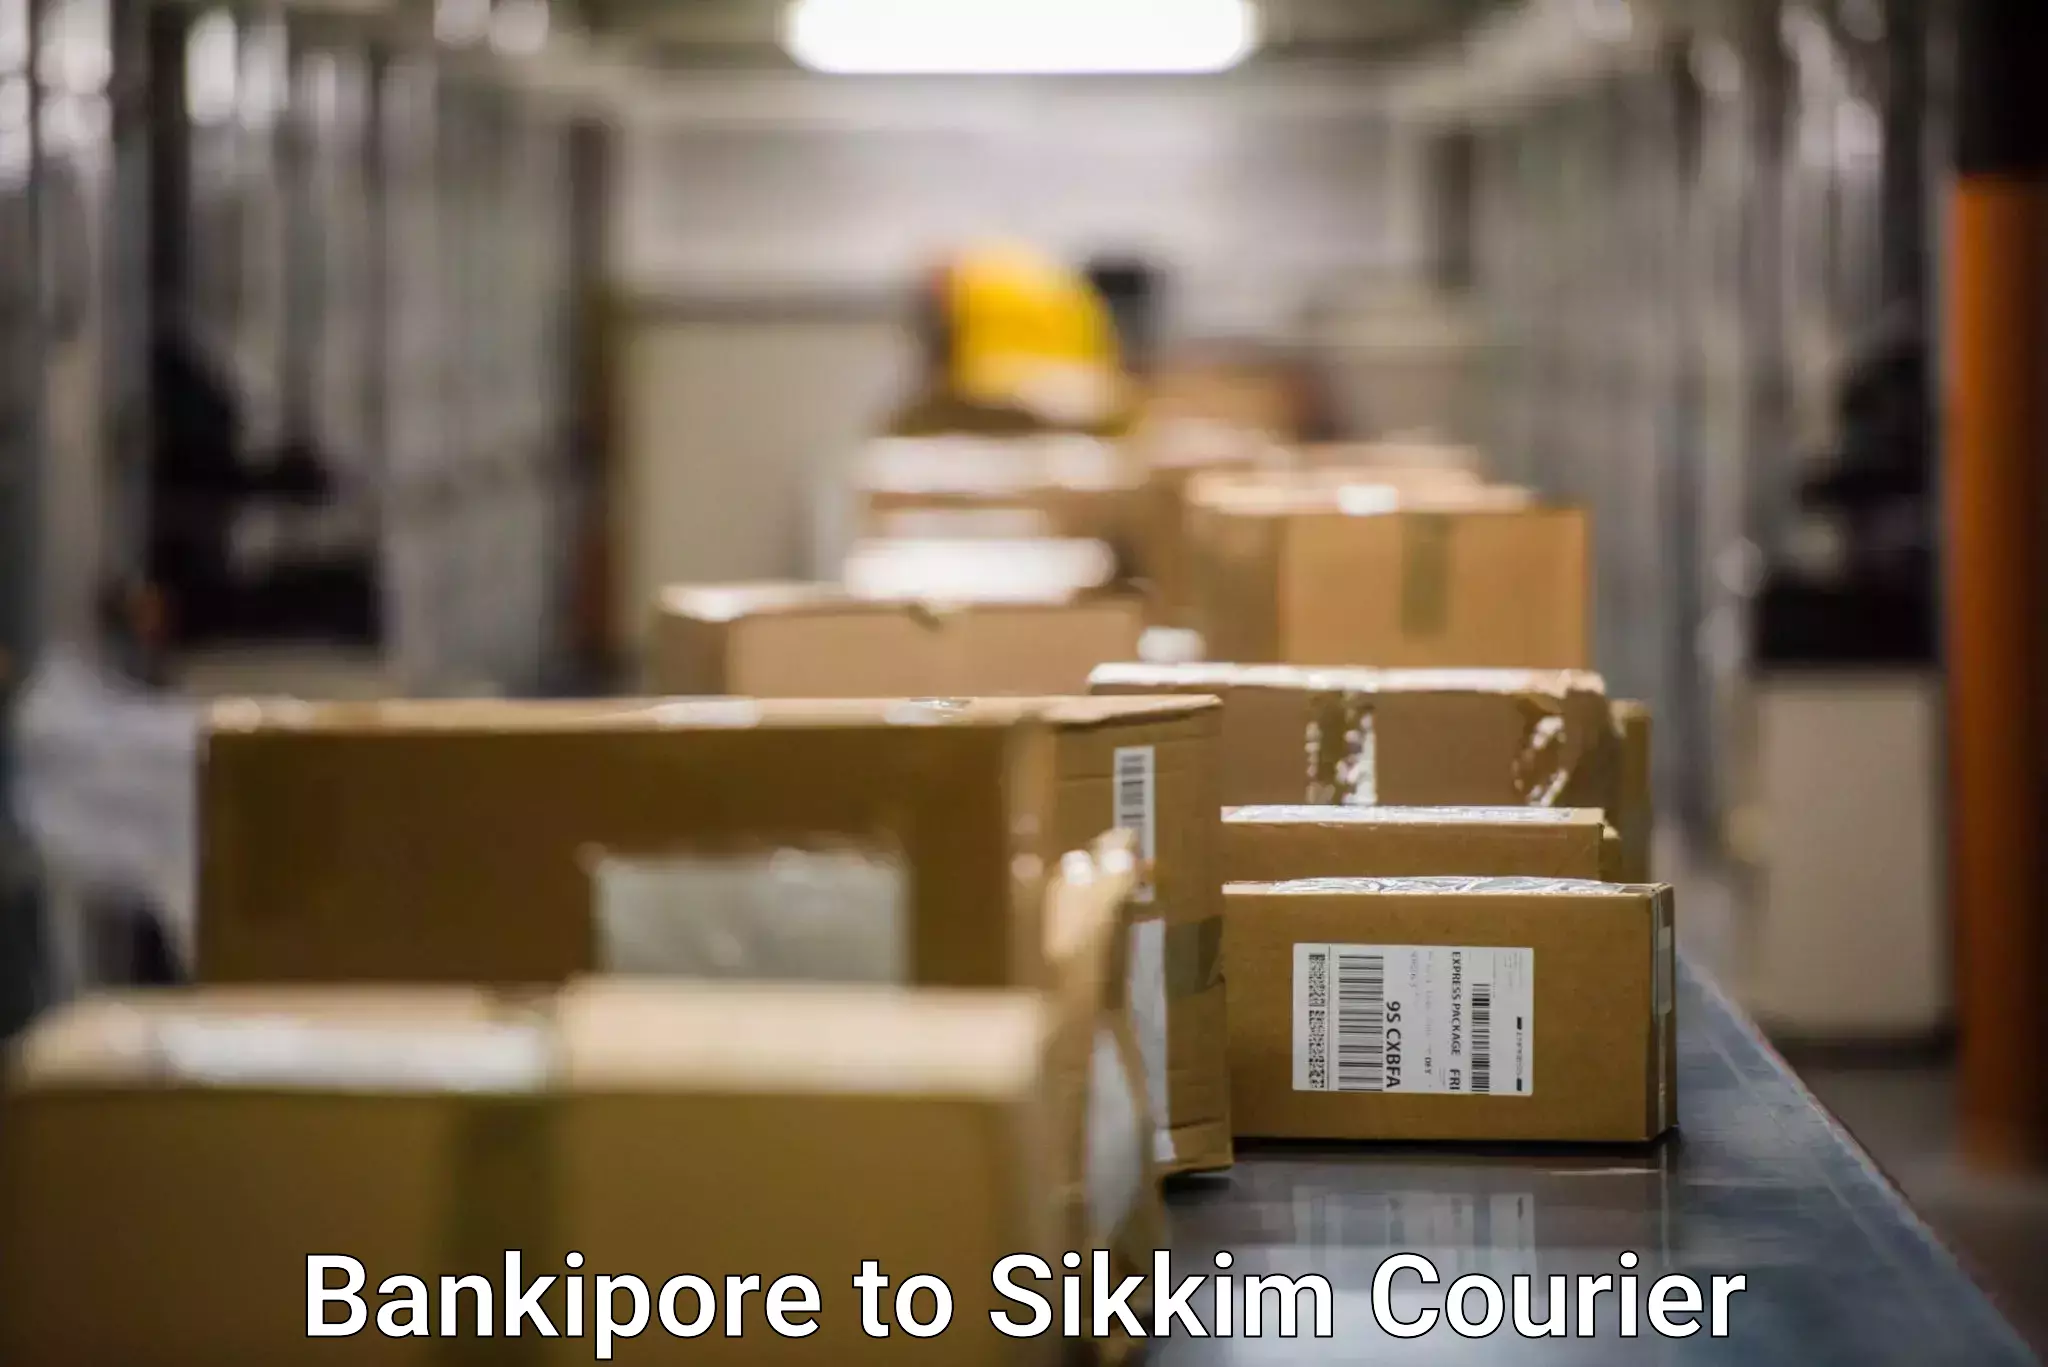 Nationwide parcel services Bankipore to Mangan